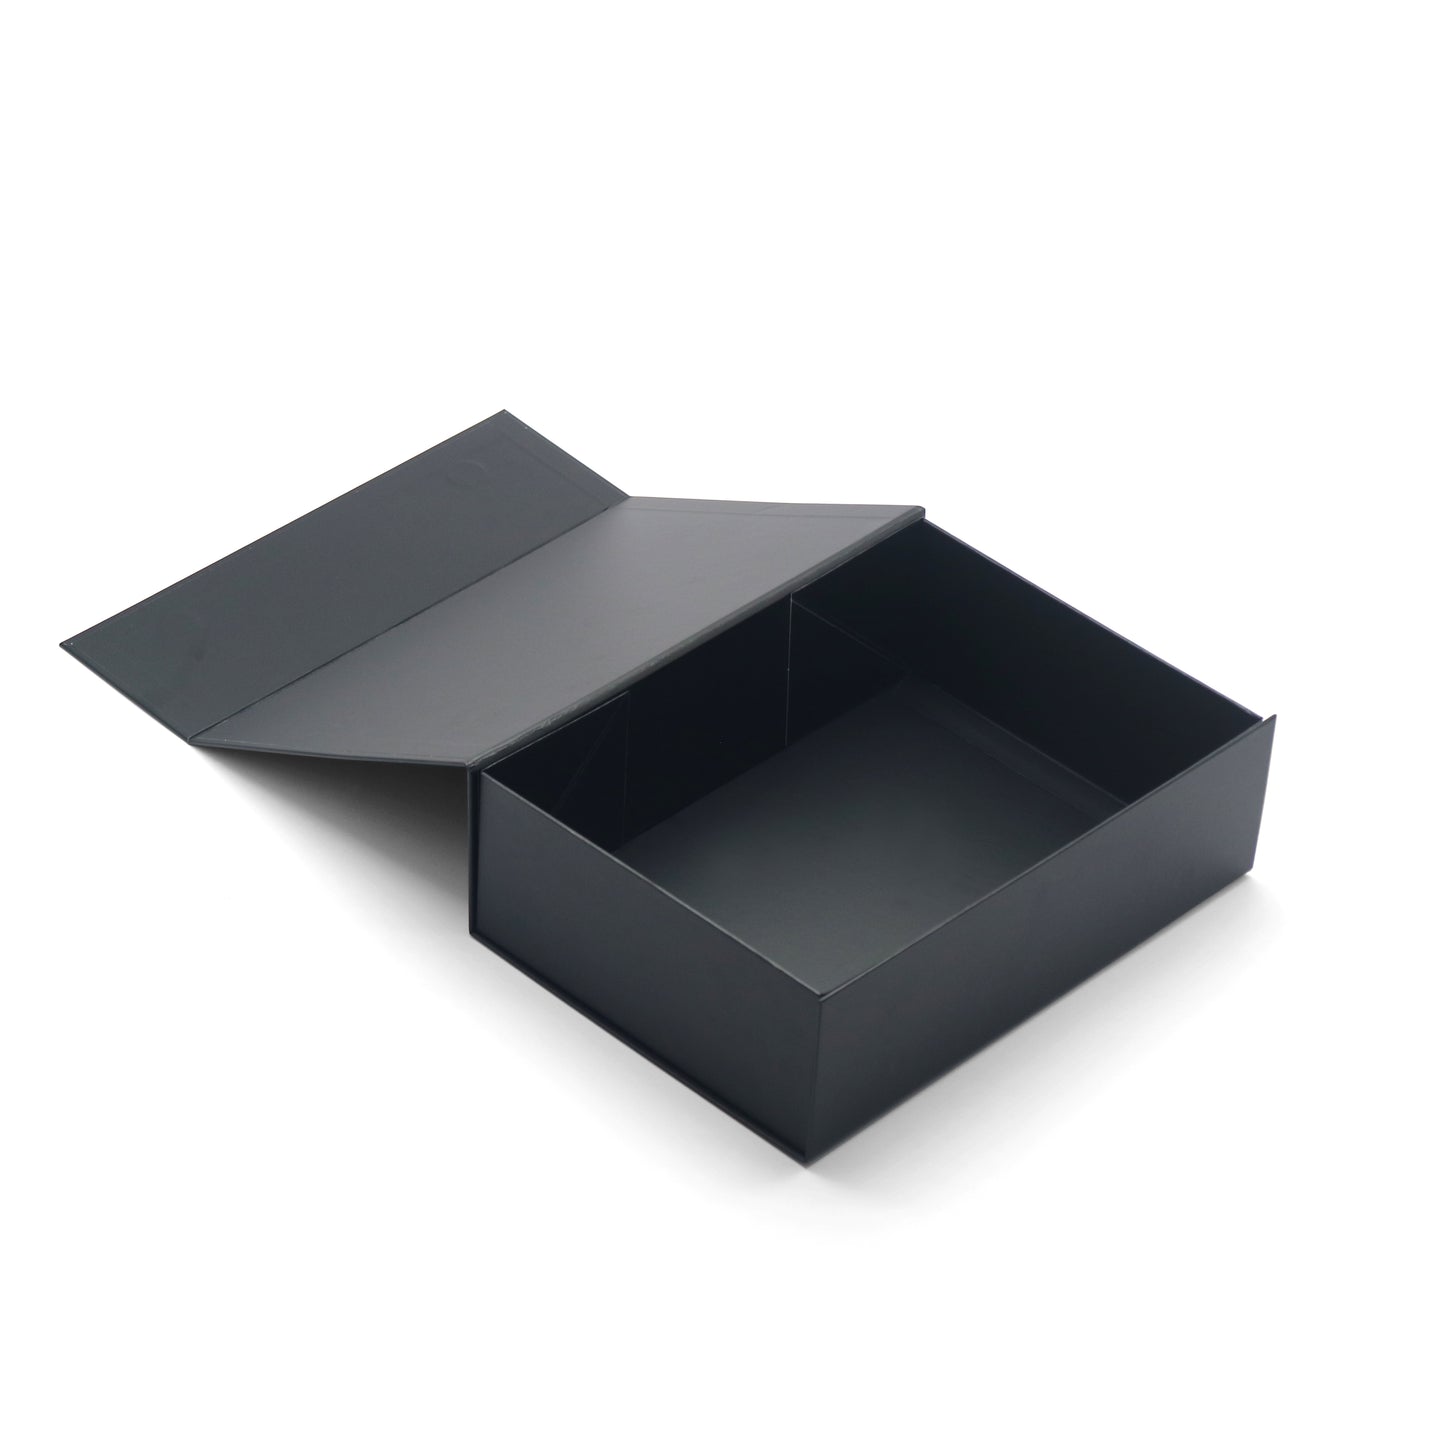 AVUX 11x8x3.5 inches (Pack of 4) Glossy Gift Box with Magnetic Lid- A Black Colored Magnetic, Durable and Reusable Gift Box Perfect for Christmas, Weddings, and Birthday Parties